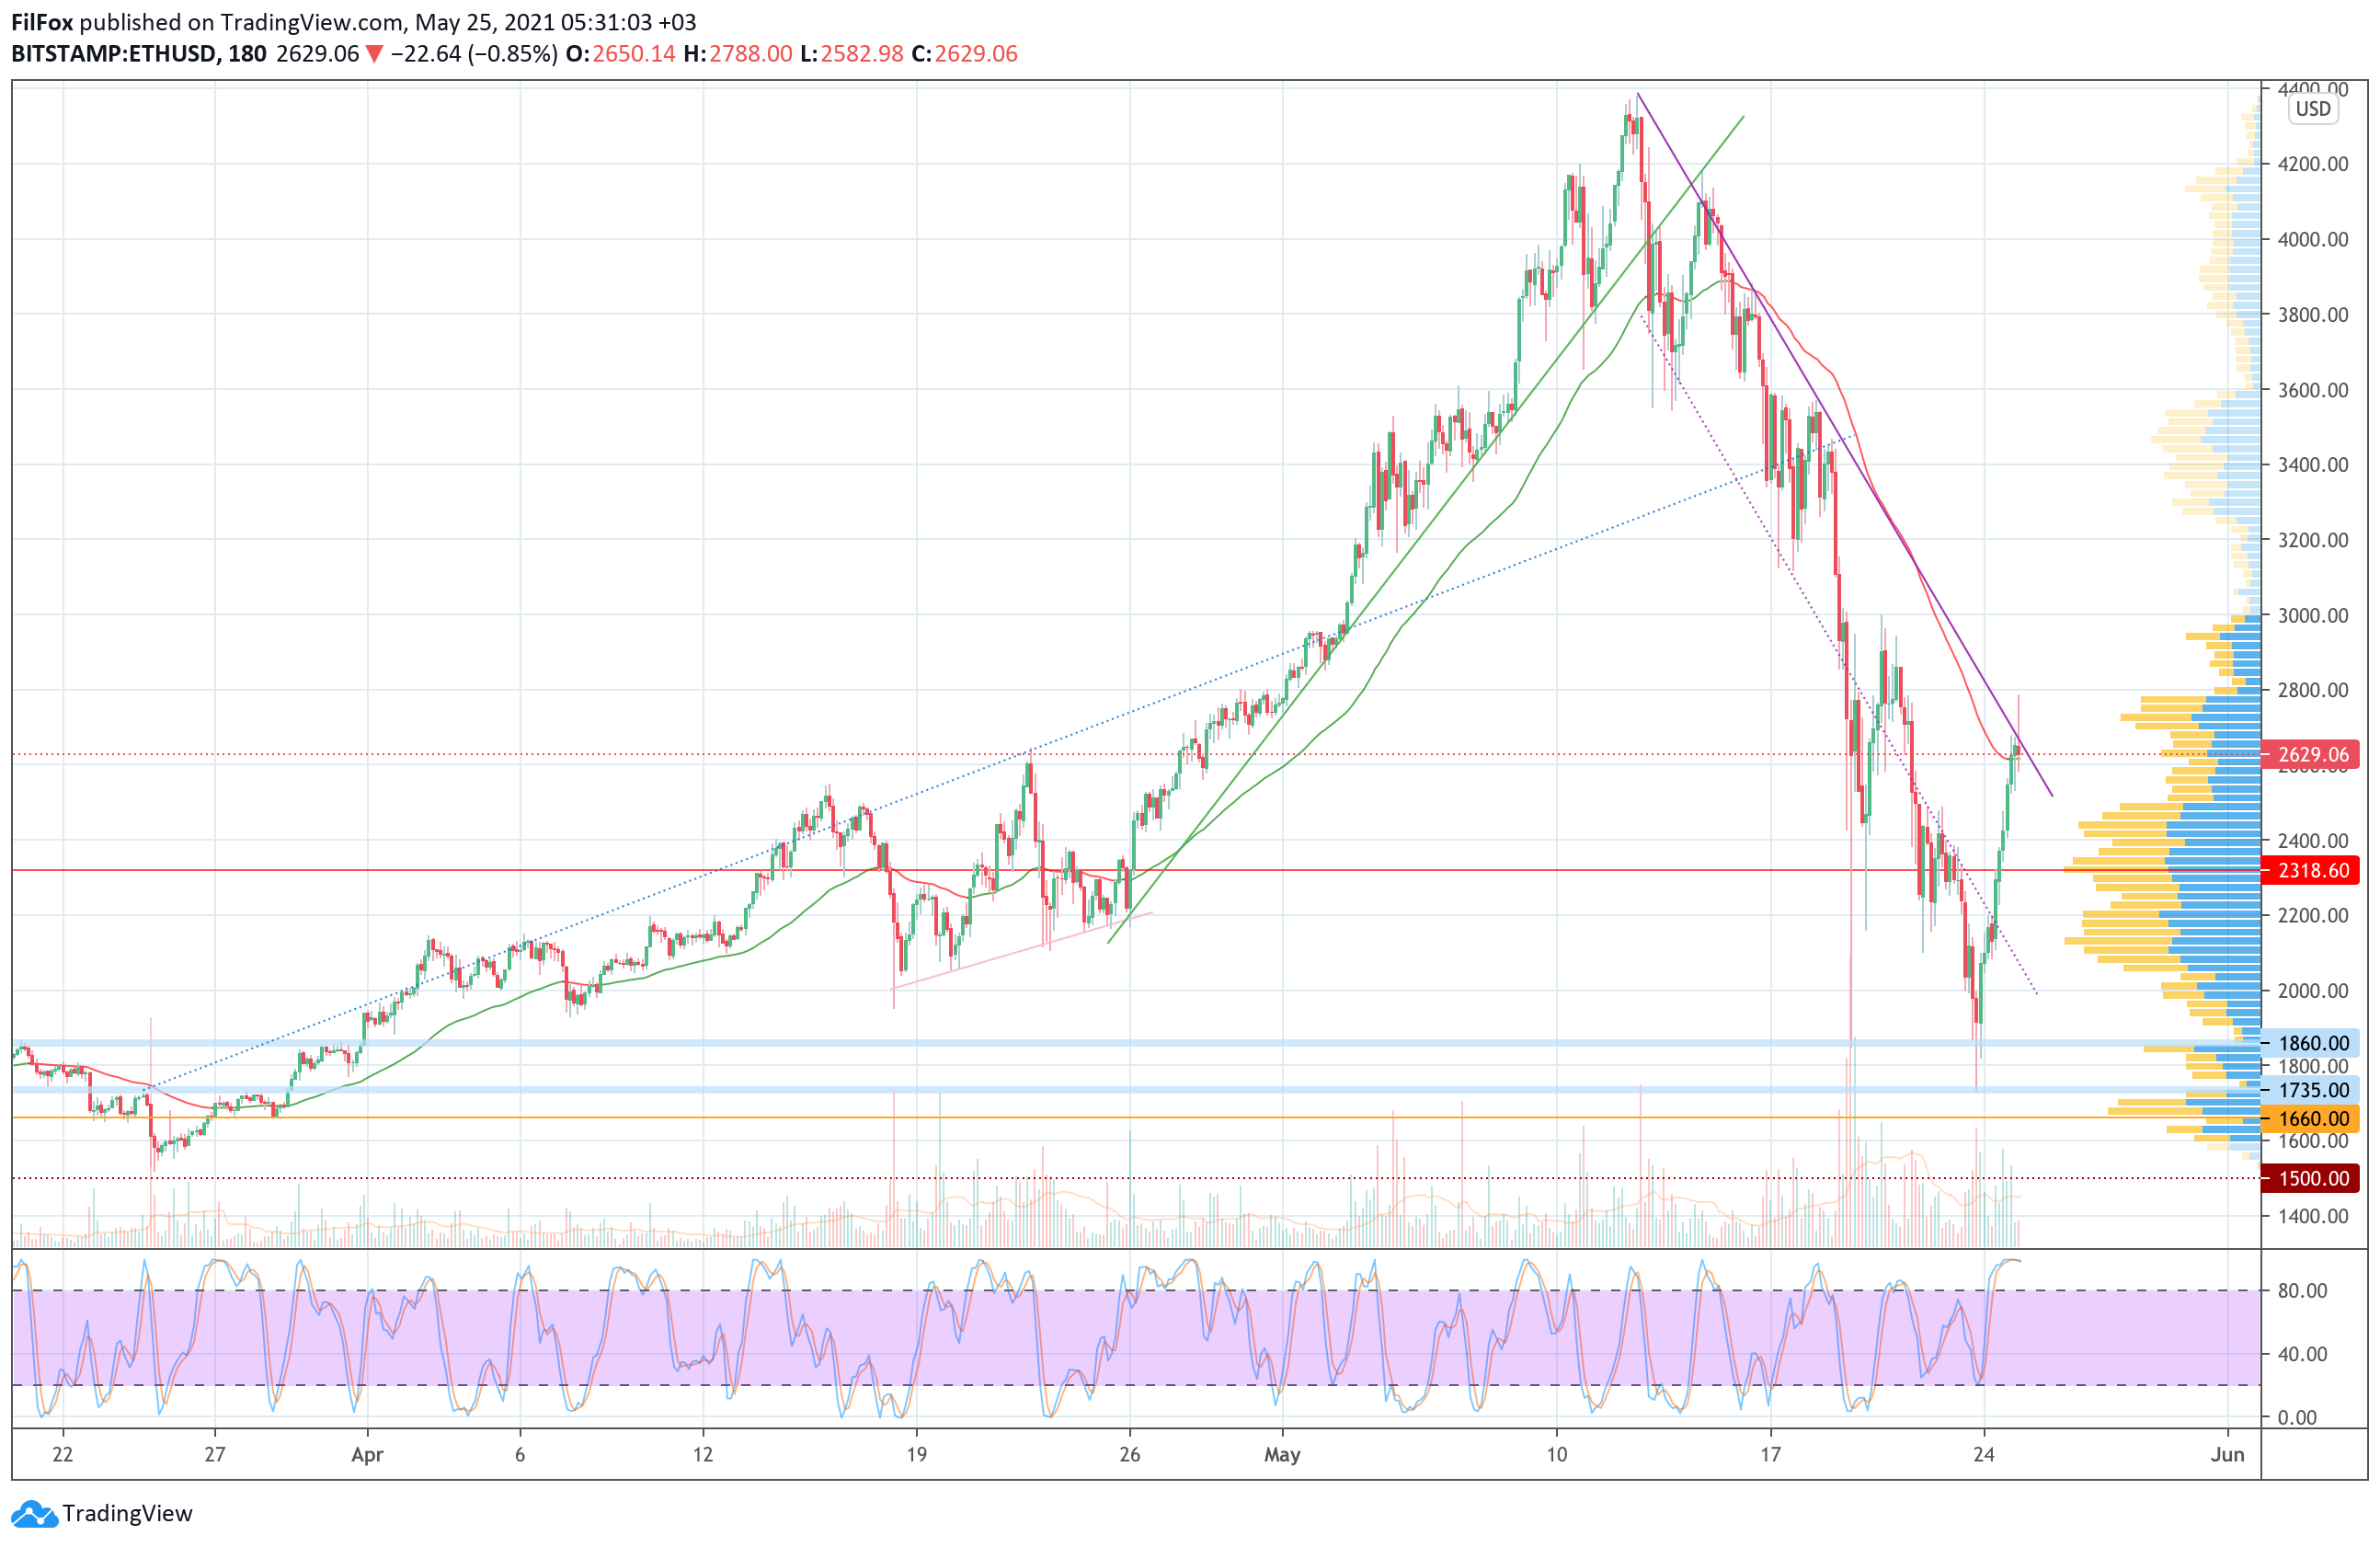 Analysis of the prices of Bitcoin, Ethereum, XRP for 05/25/2021